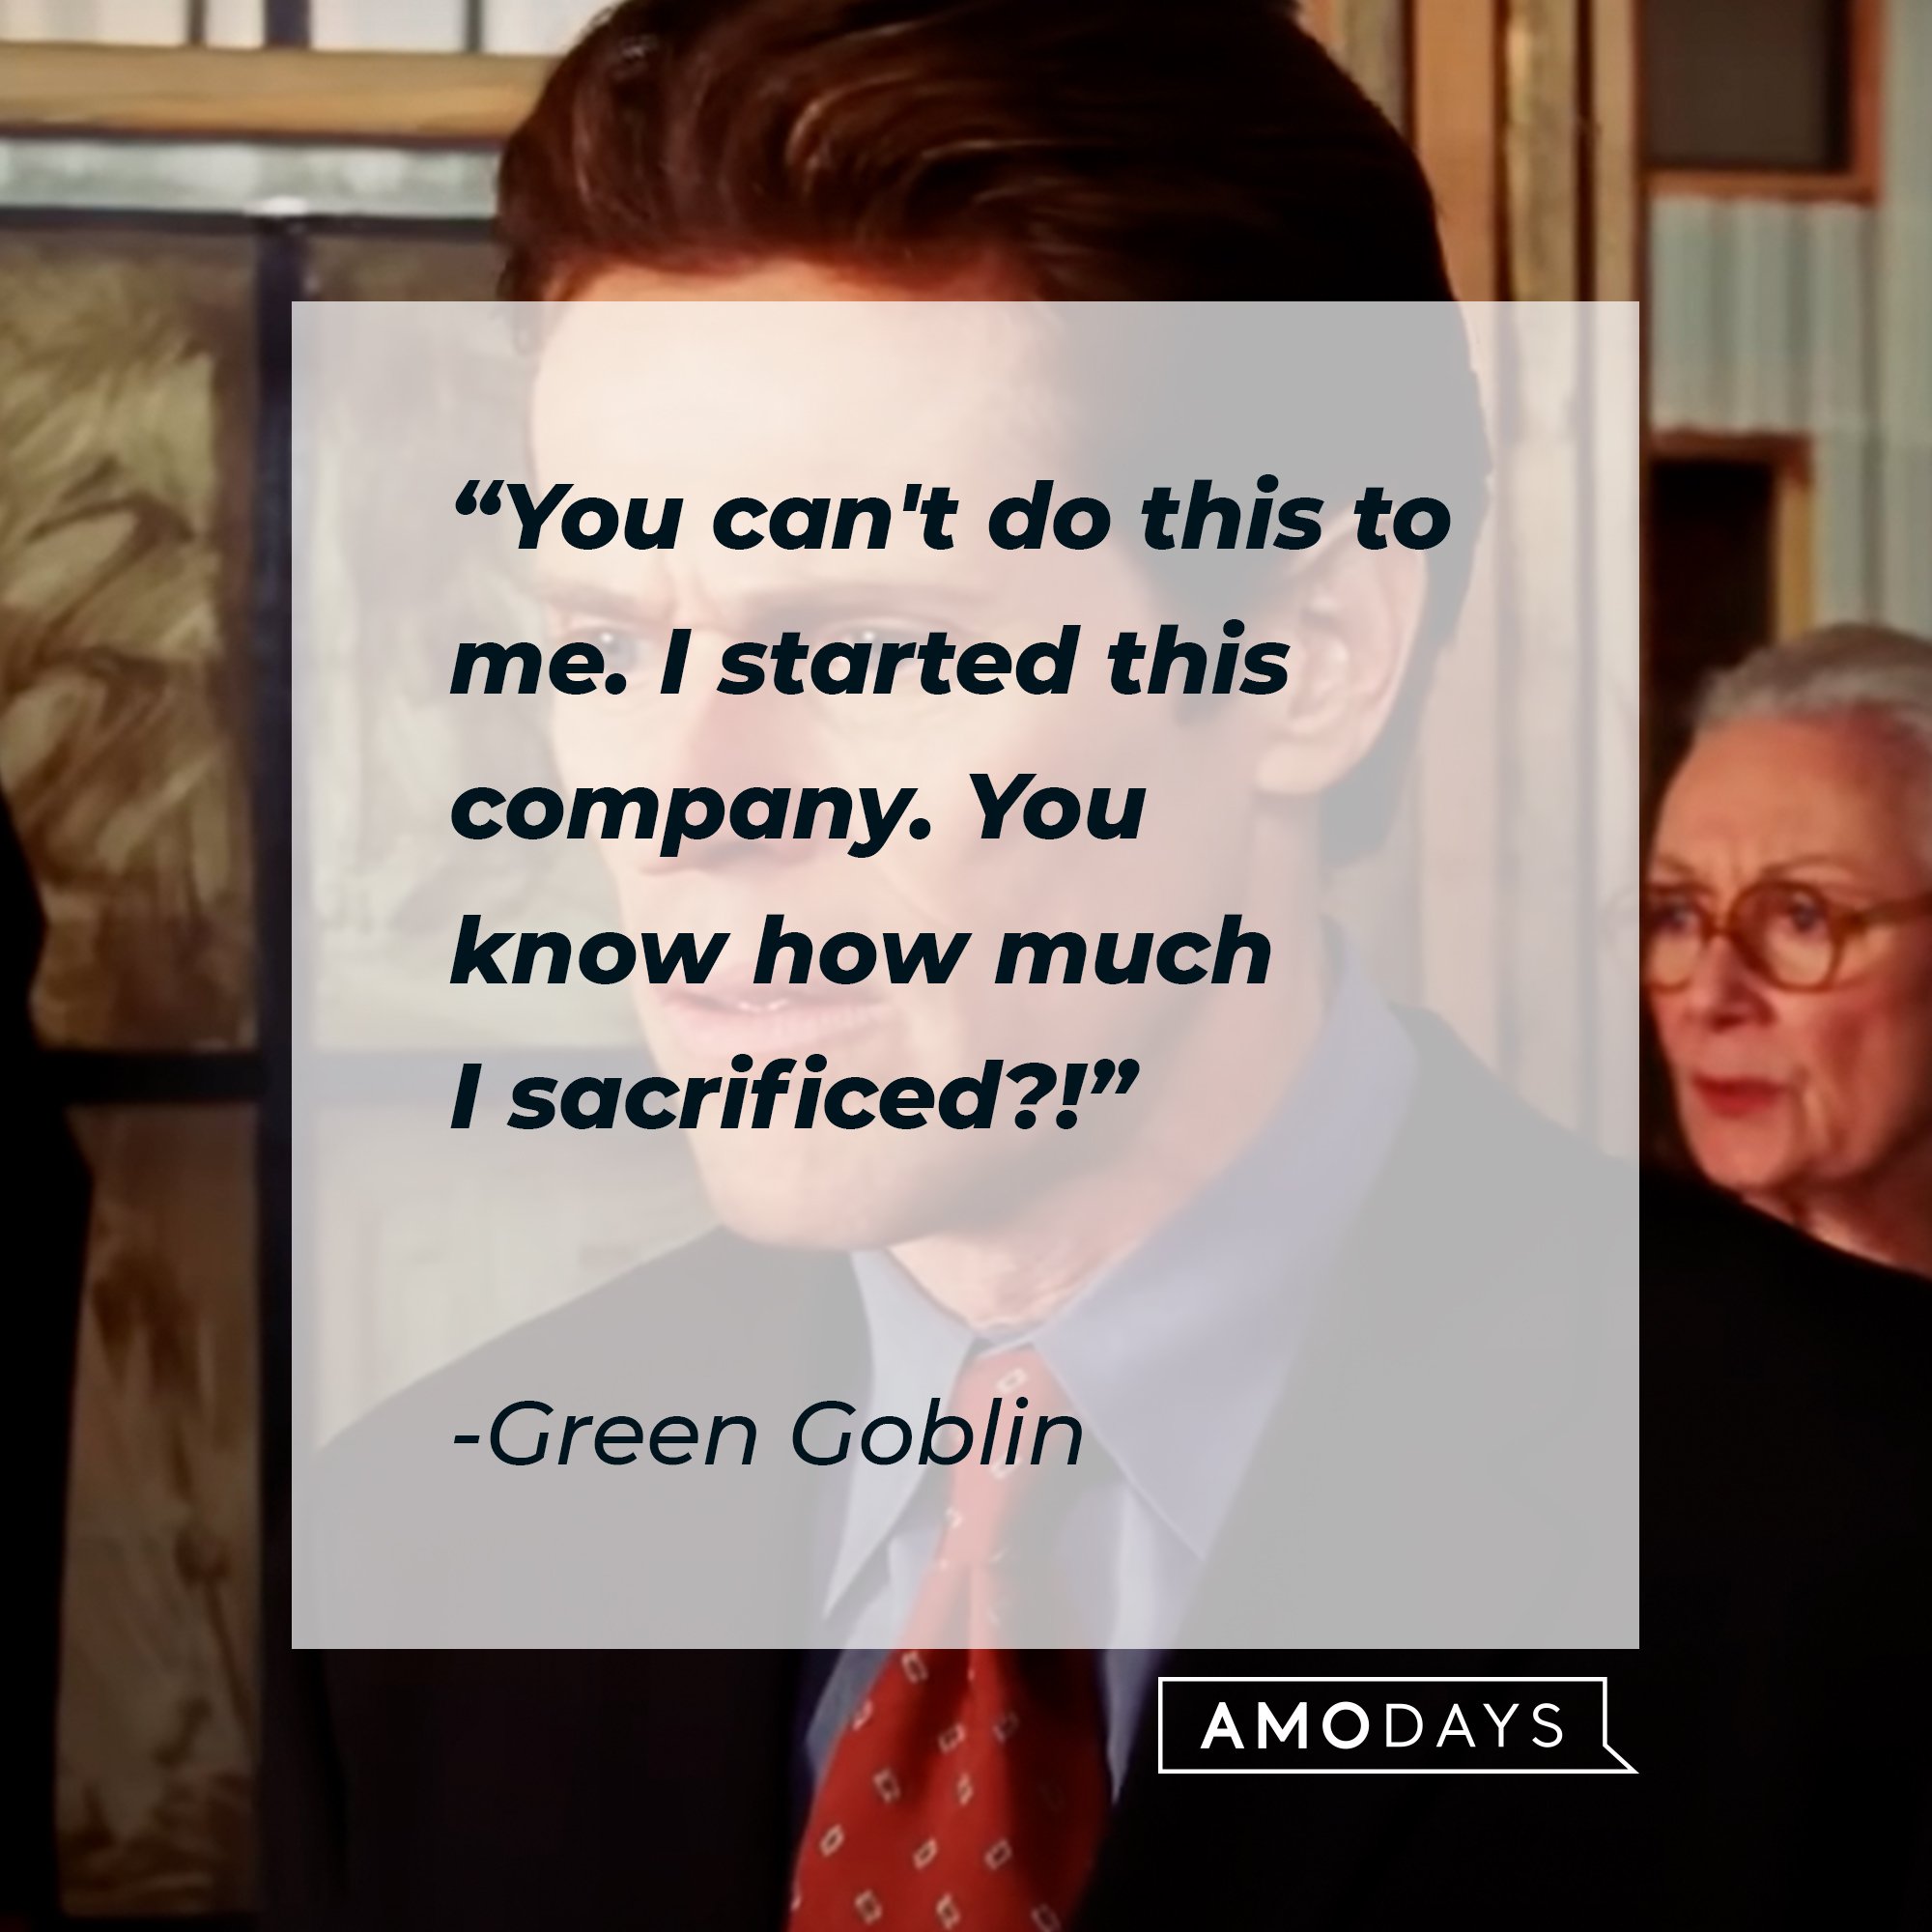 Green Goblin's quote: "You can't do this to me. I started this company. You know how much I sacrificed?!" | Image: AmoDays